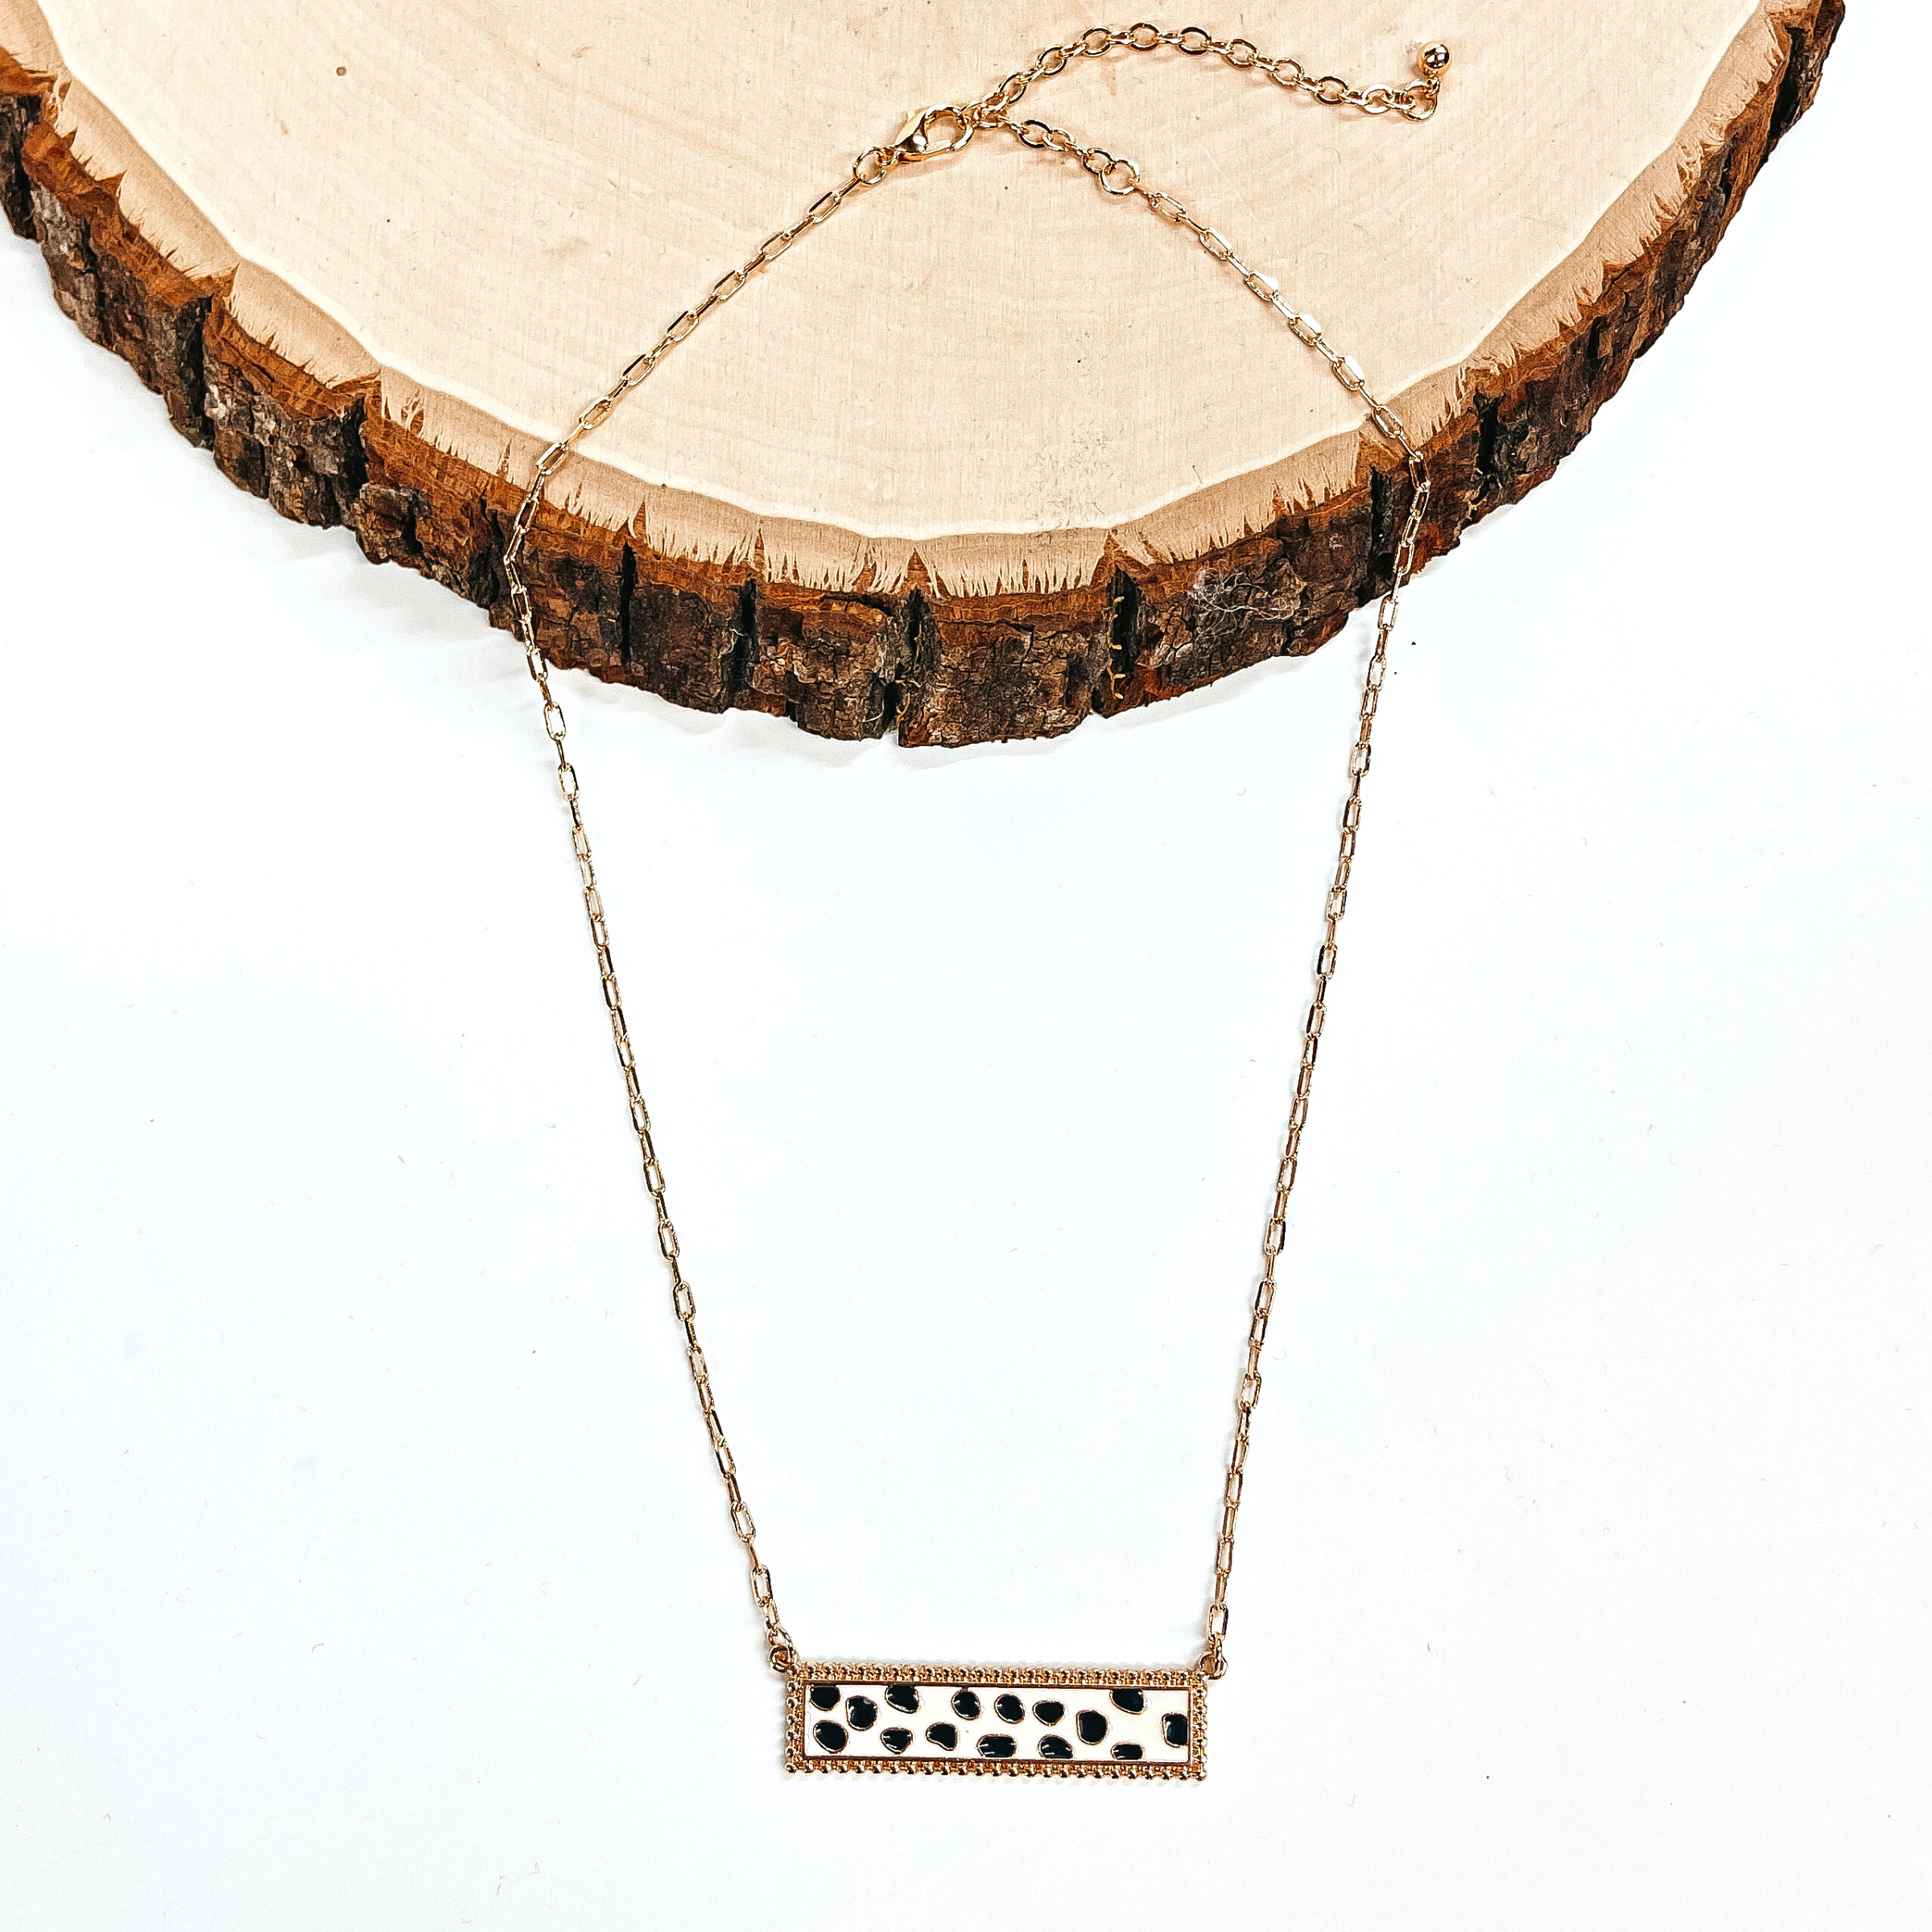 This is a thin gold tone chain necklace with a rectangle bar pendant in black and white  dotted print. The black and white dotted print rectangle bar is in a gold tone setting. This necklace is taken laying on a white background and a slab of wood.